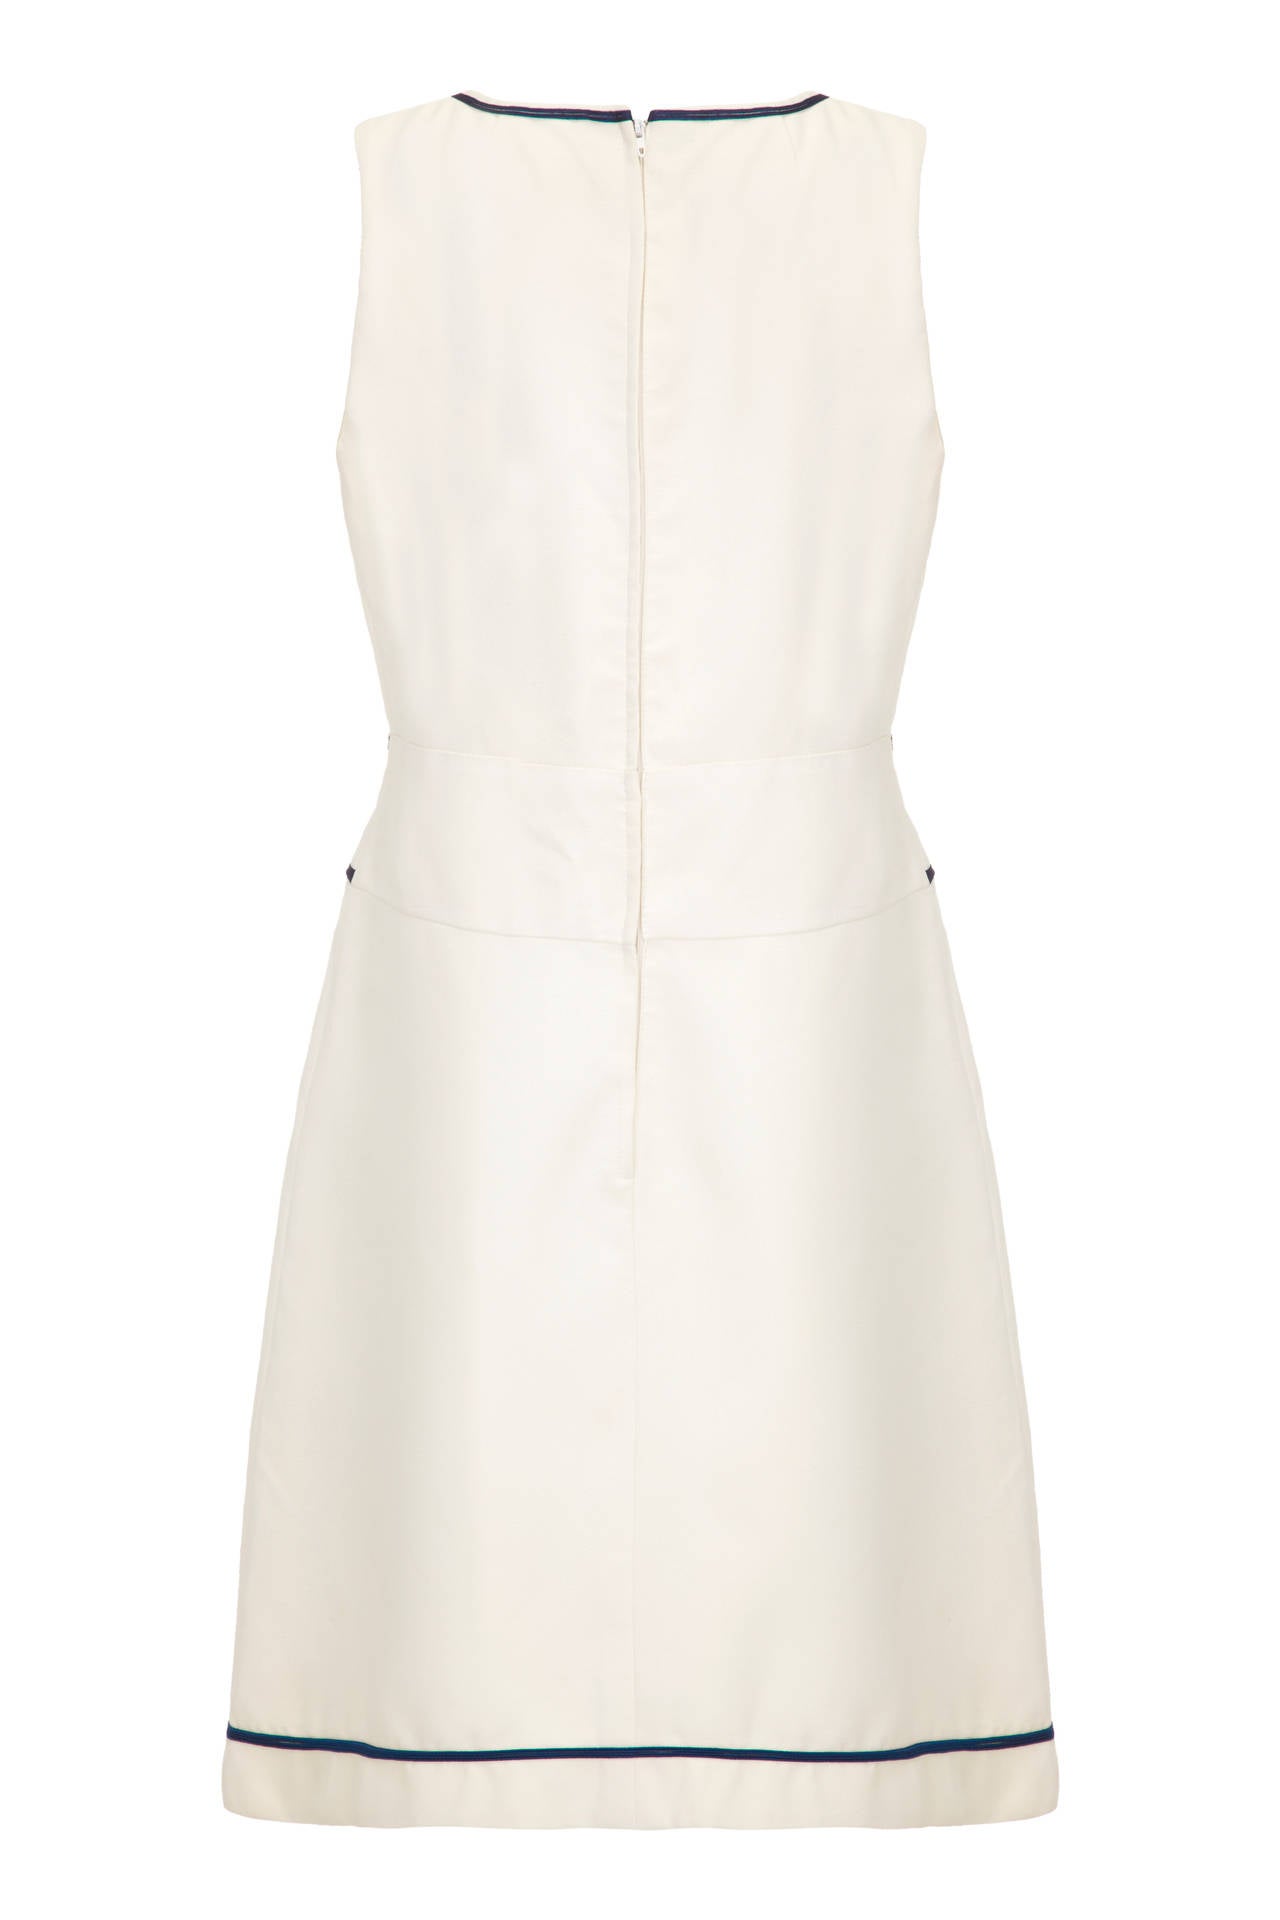 This desirable 1960s off-white mini dress by Louis Feraud for Rembrandt is in pristine vintage condition and superbly adaptable with a smart contemporary aesthetic. Made of thick nylon crepe fabric, the dress is sleeveless, tailored snugly over the